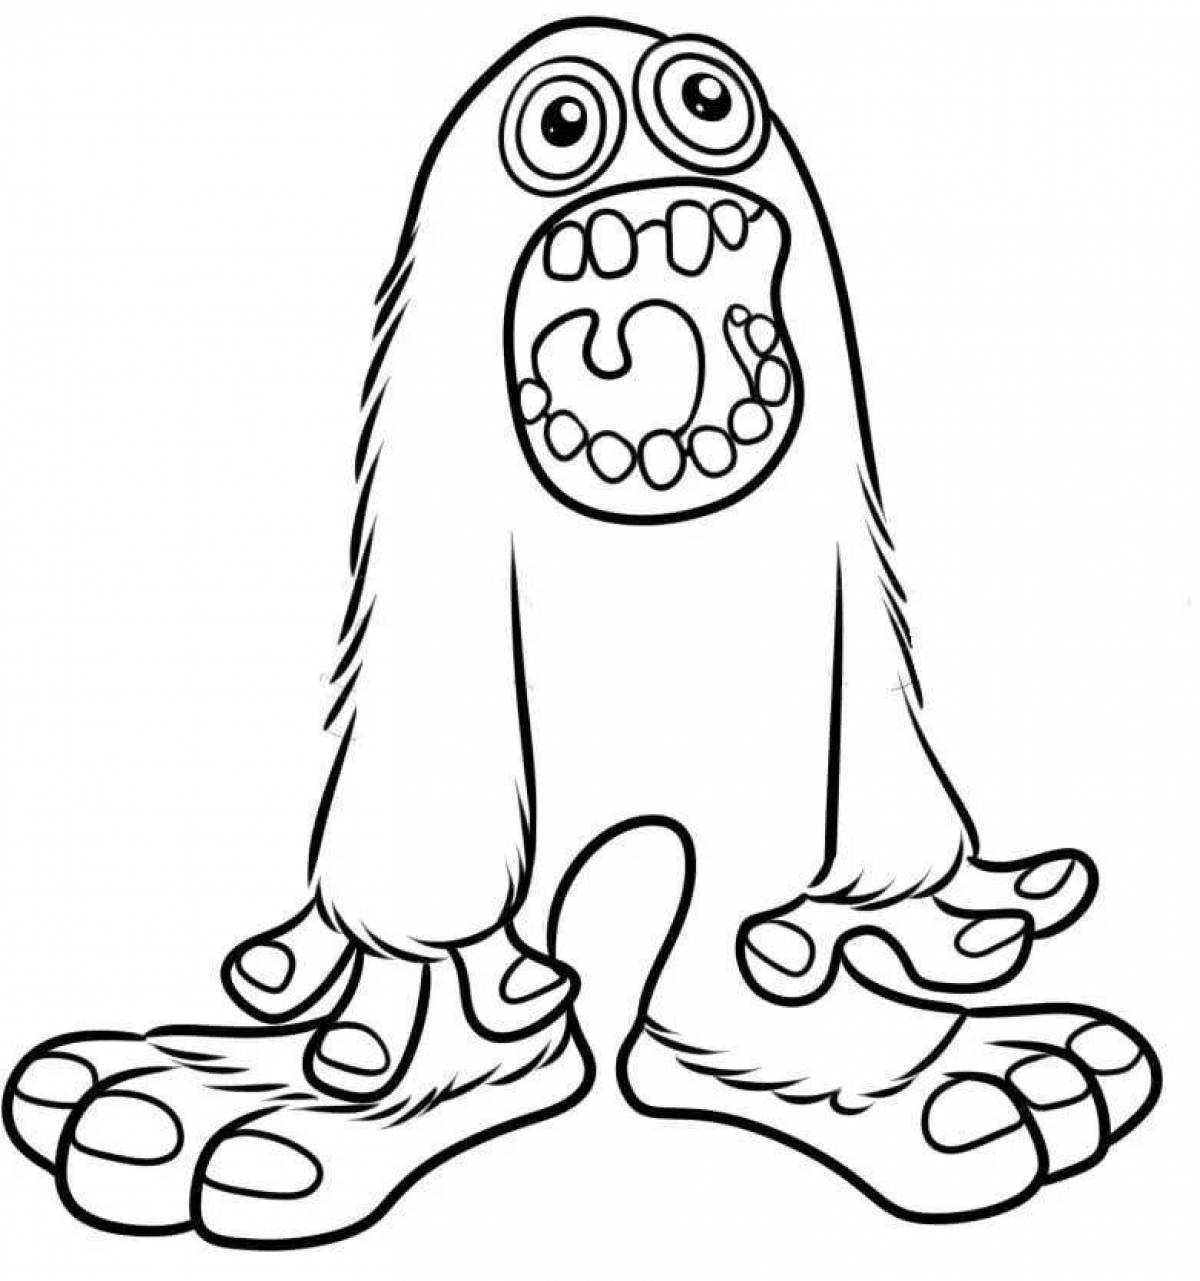 Coloring page adorable my singing monsters